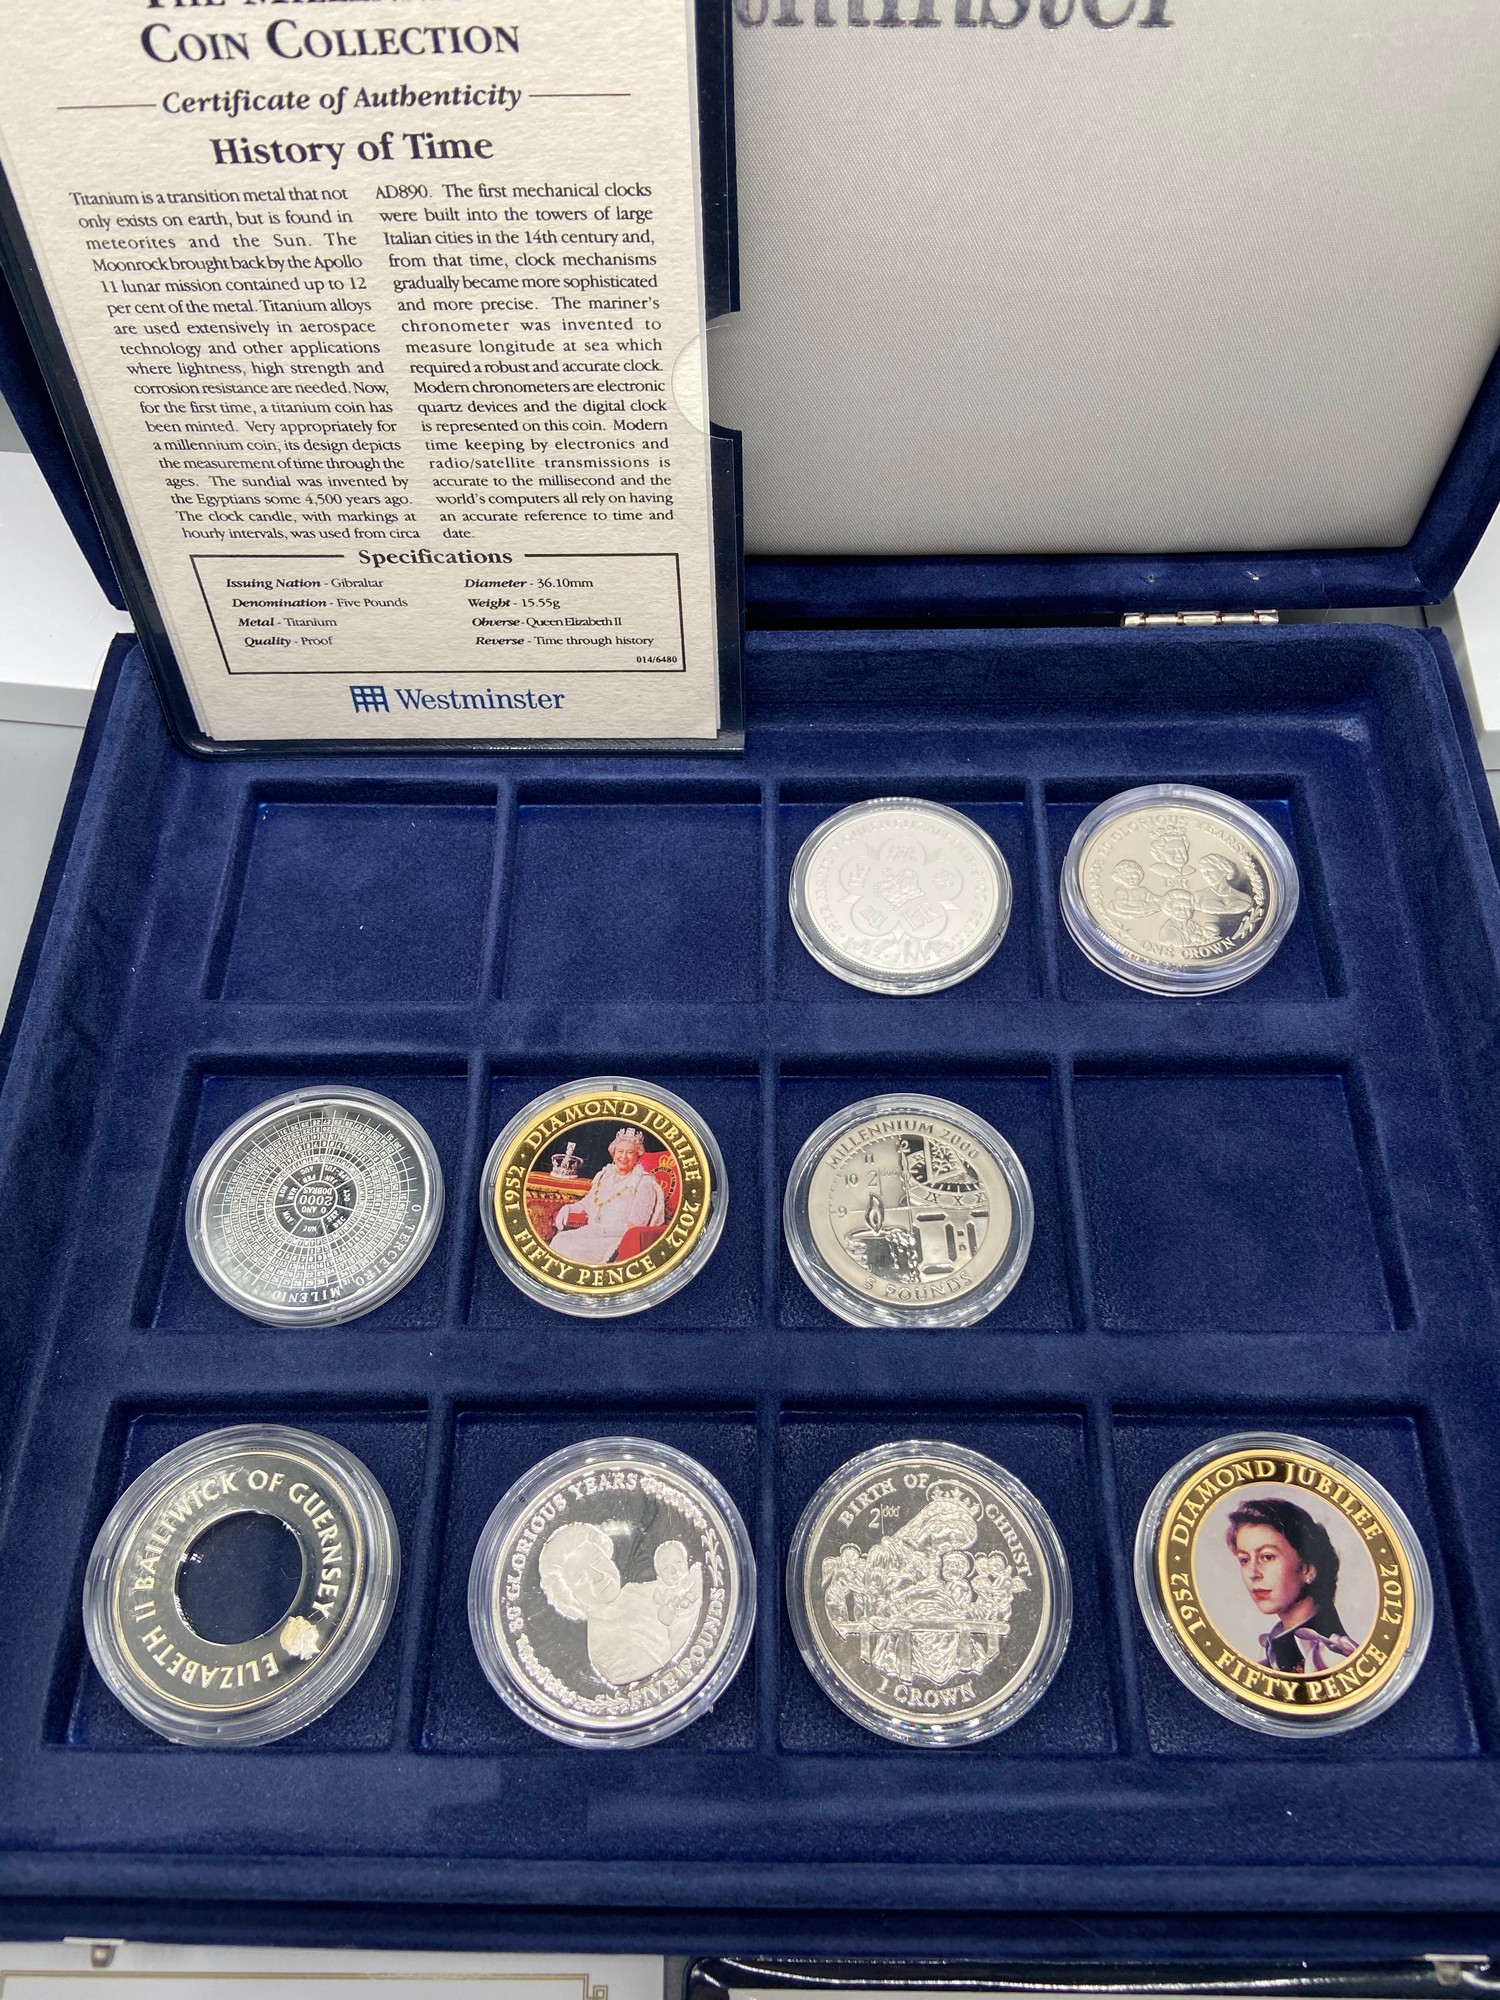 A Westminster Mint 'The Millennium' coin collection [4 coins] with a